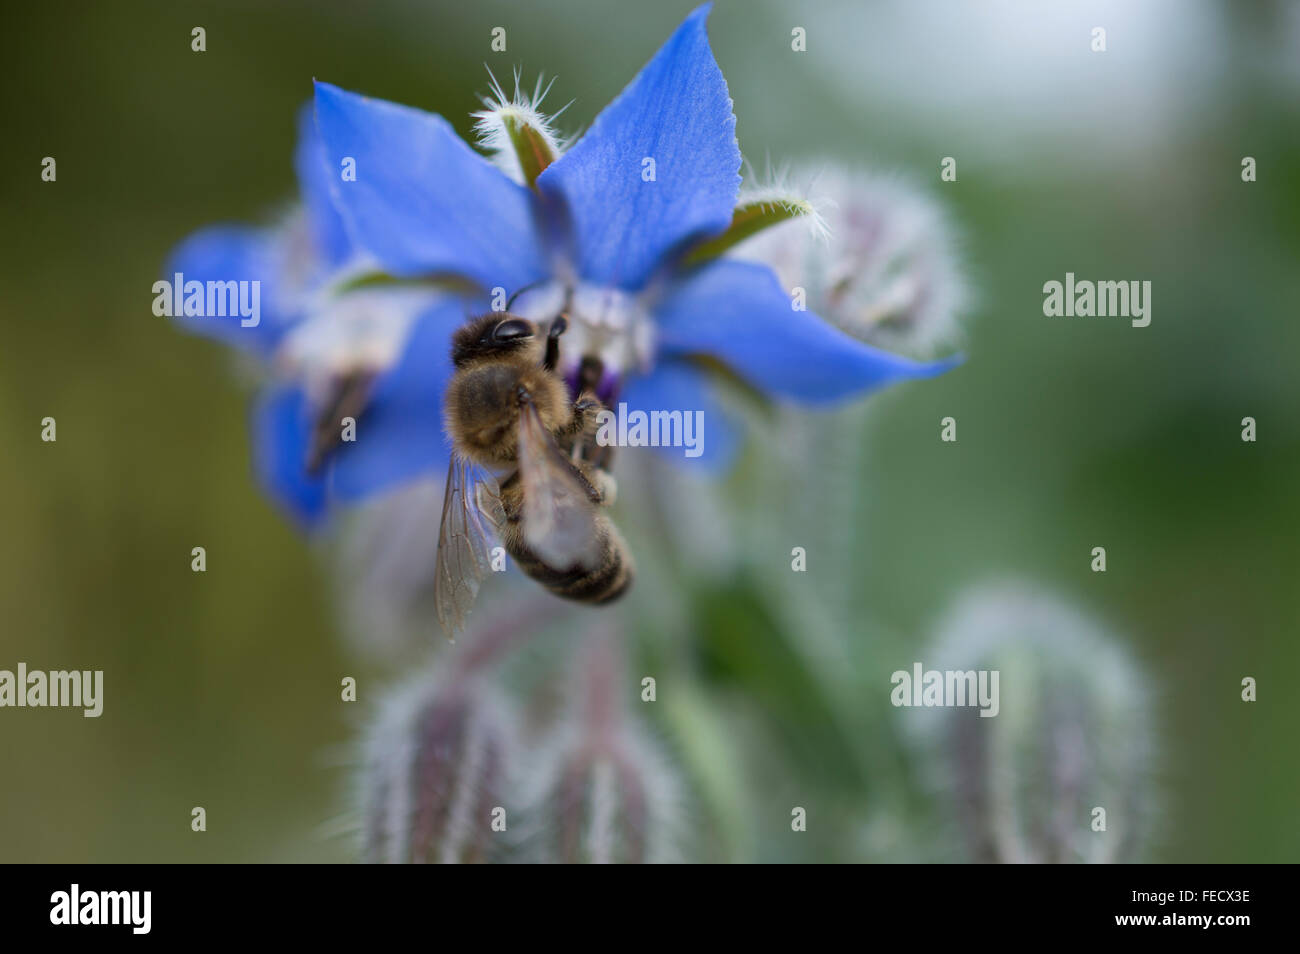 This is an image of a bee collecting honey of this blue flower. Stock Photo